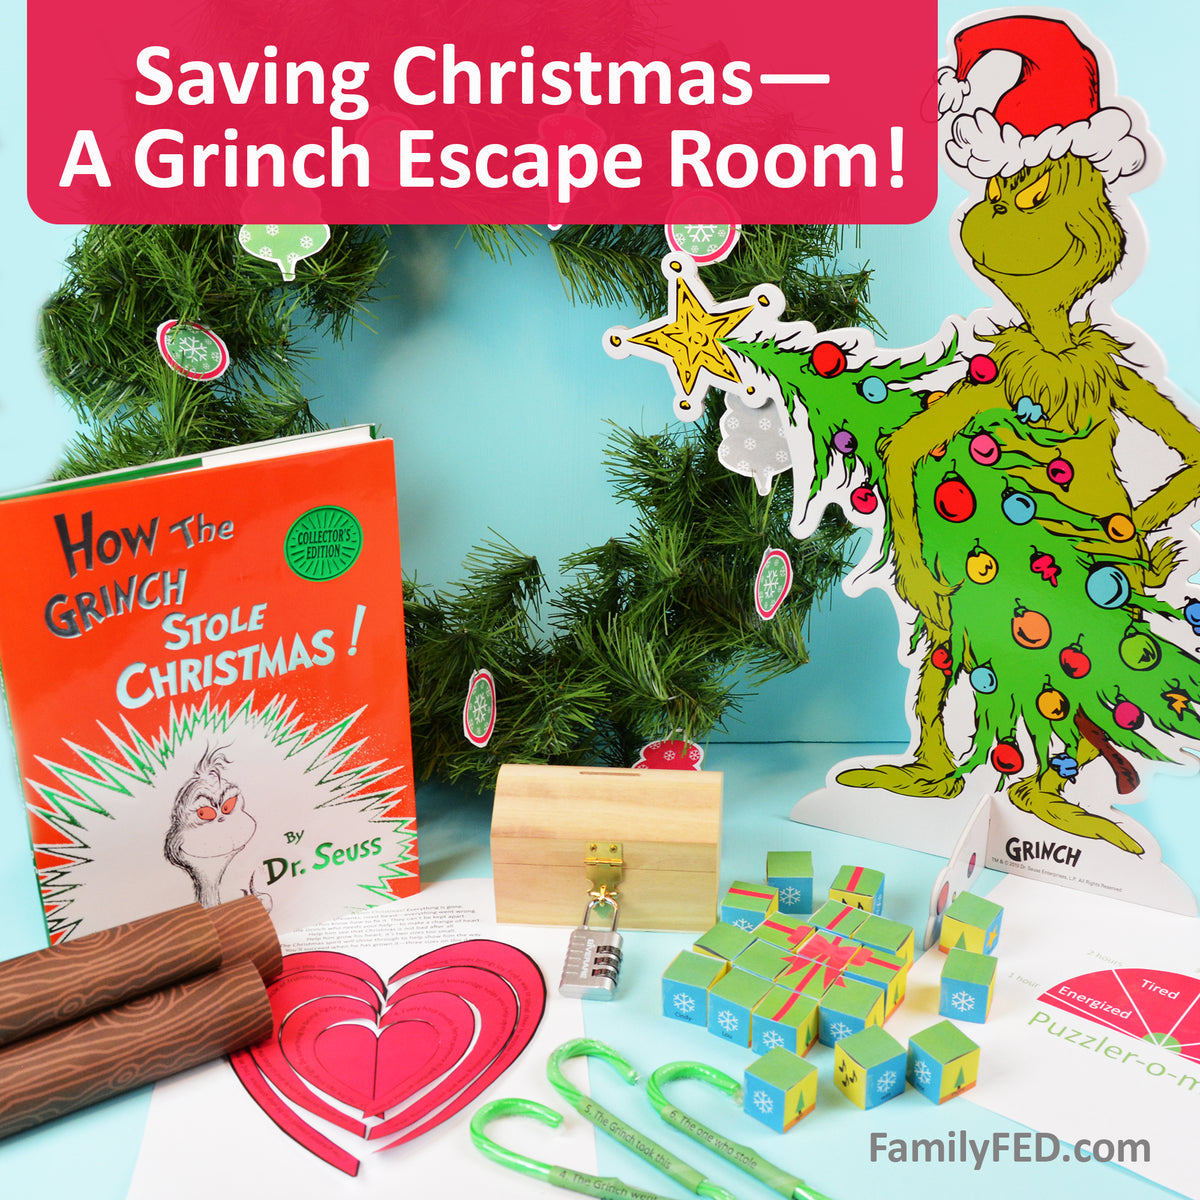 Saving Christmas—A Grinch Escape Room DIY for the Best Christmas